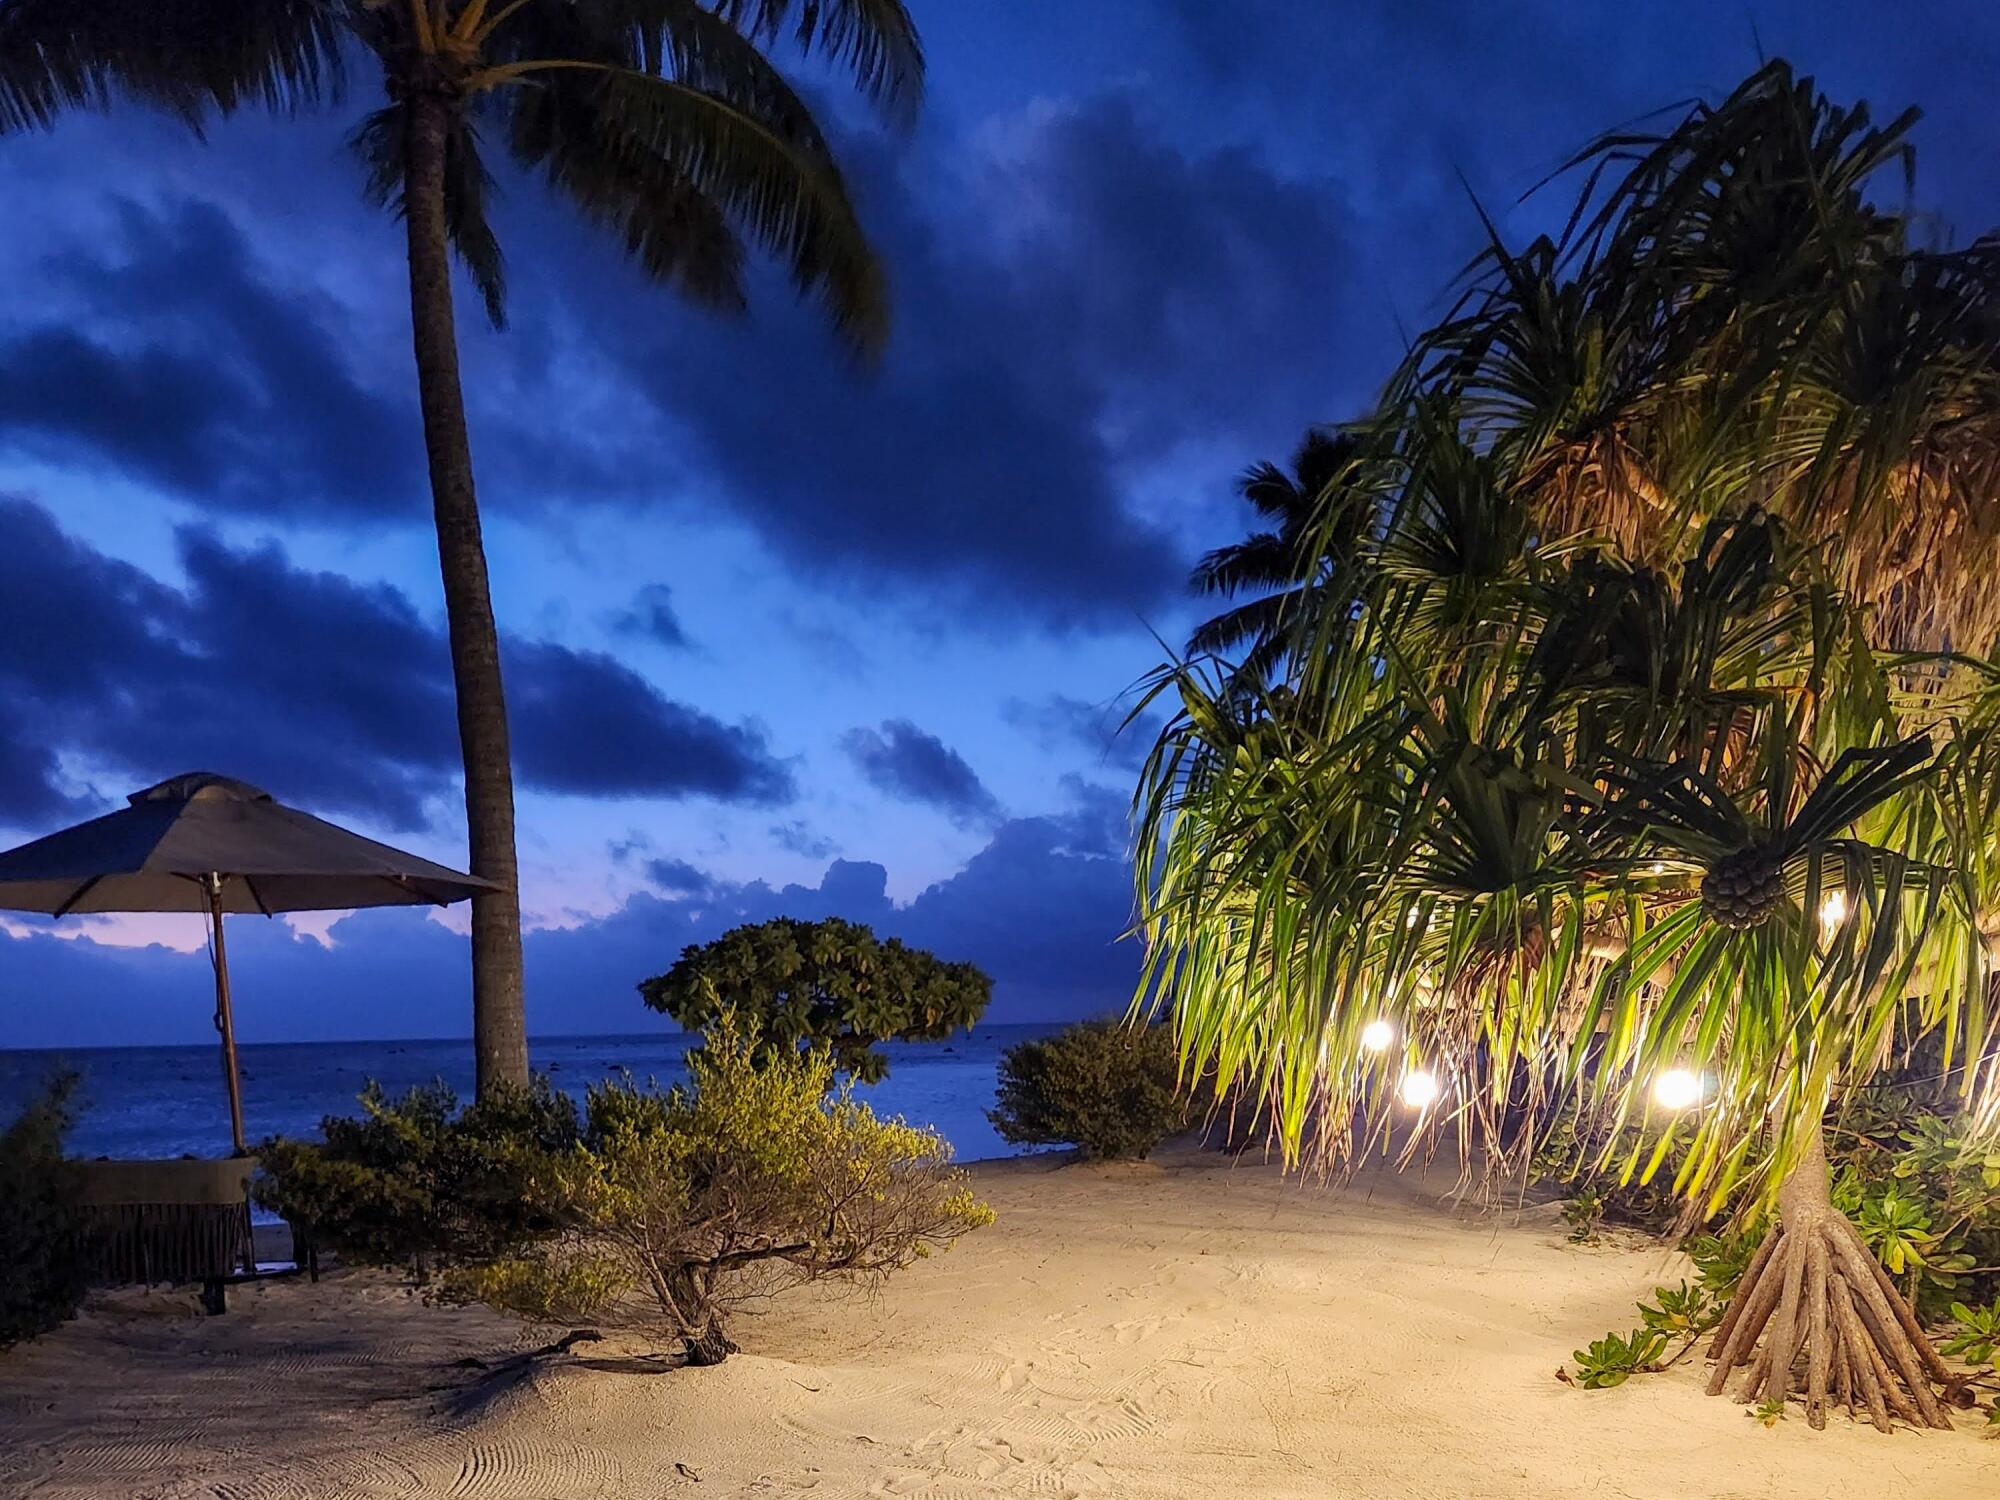 An evening view from the open-air bar on Tetiaroa.